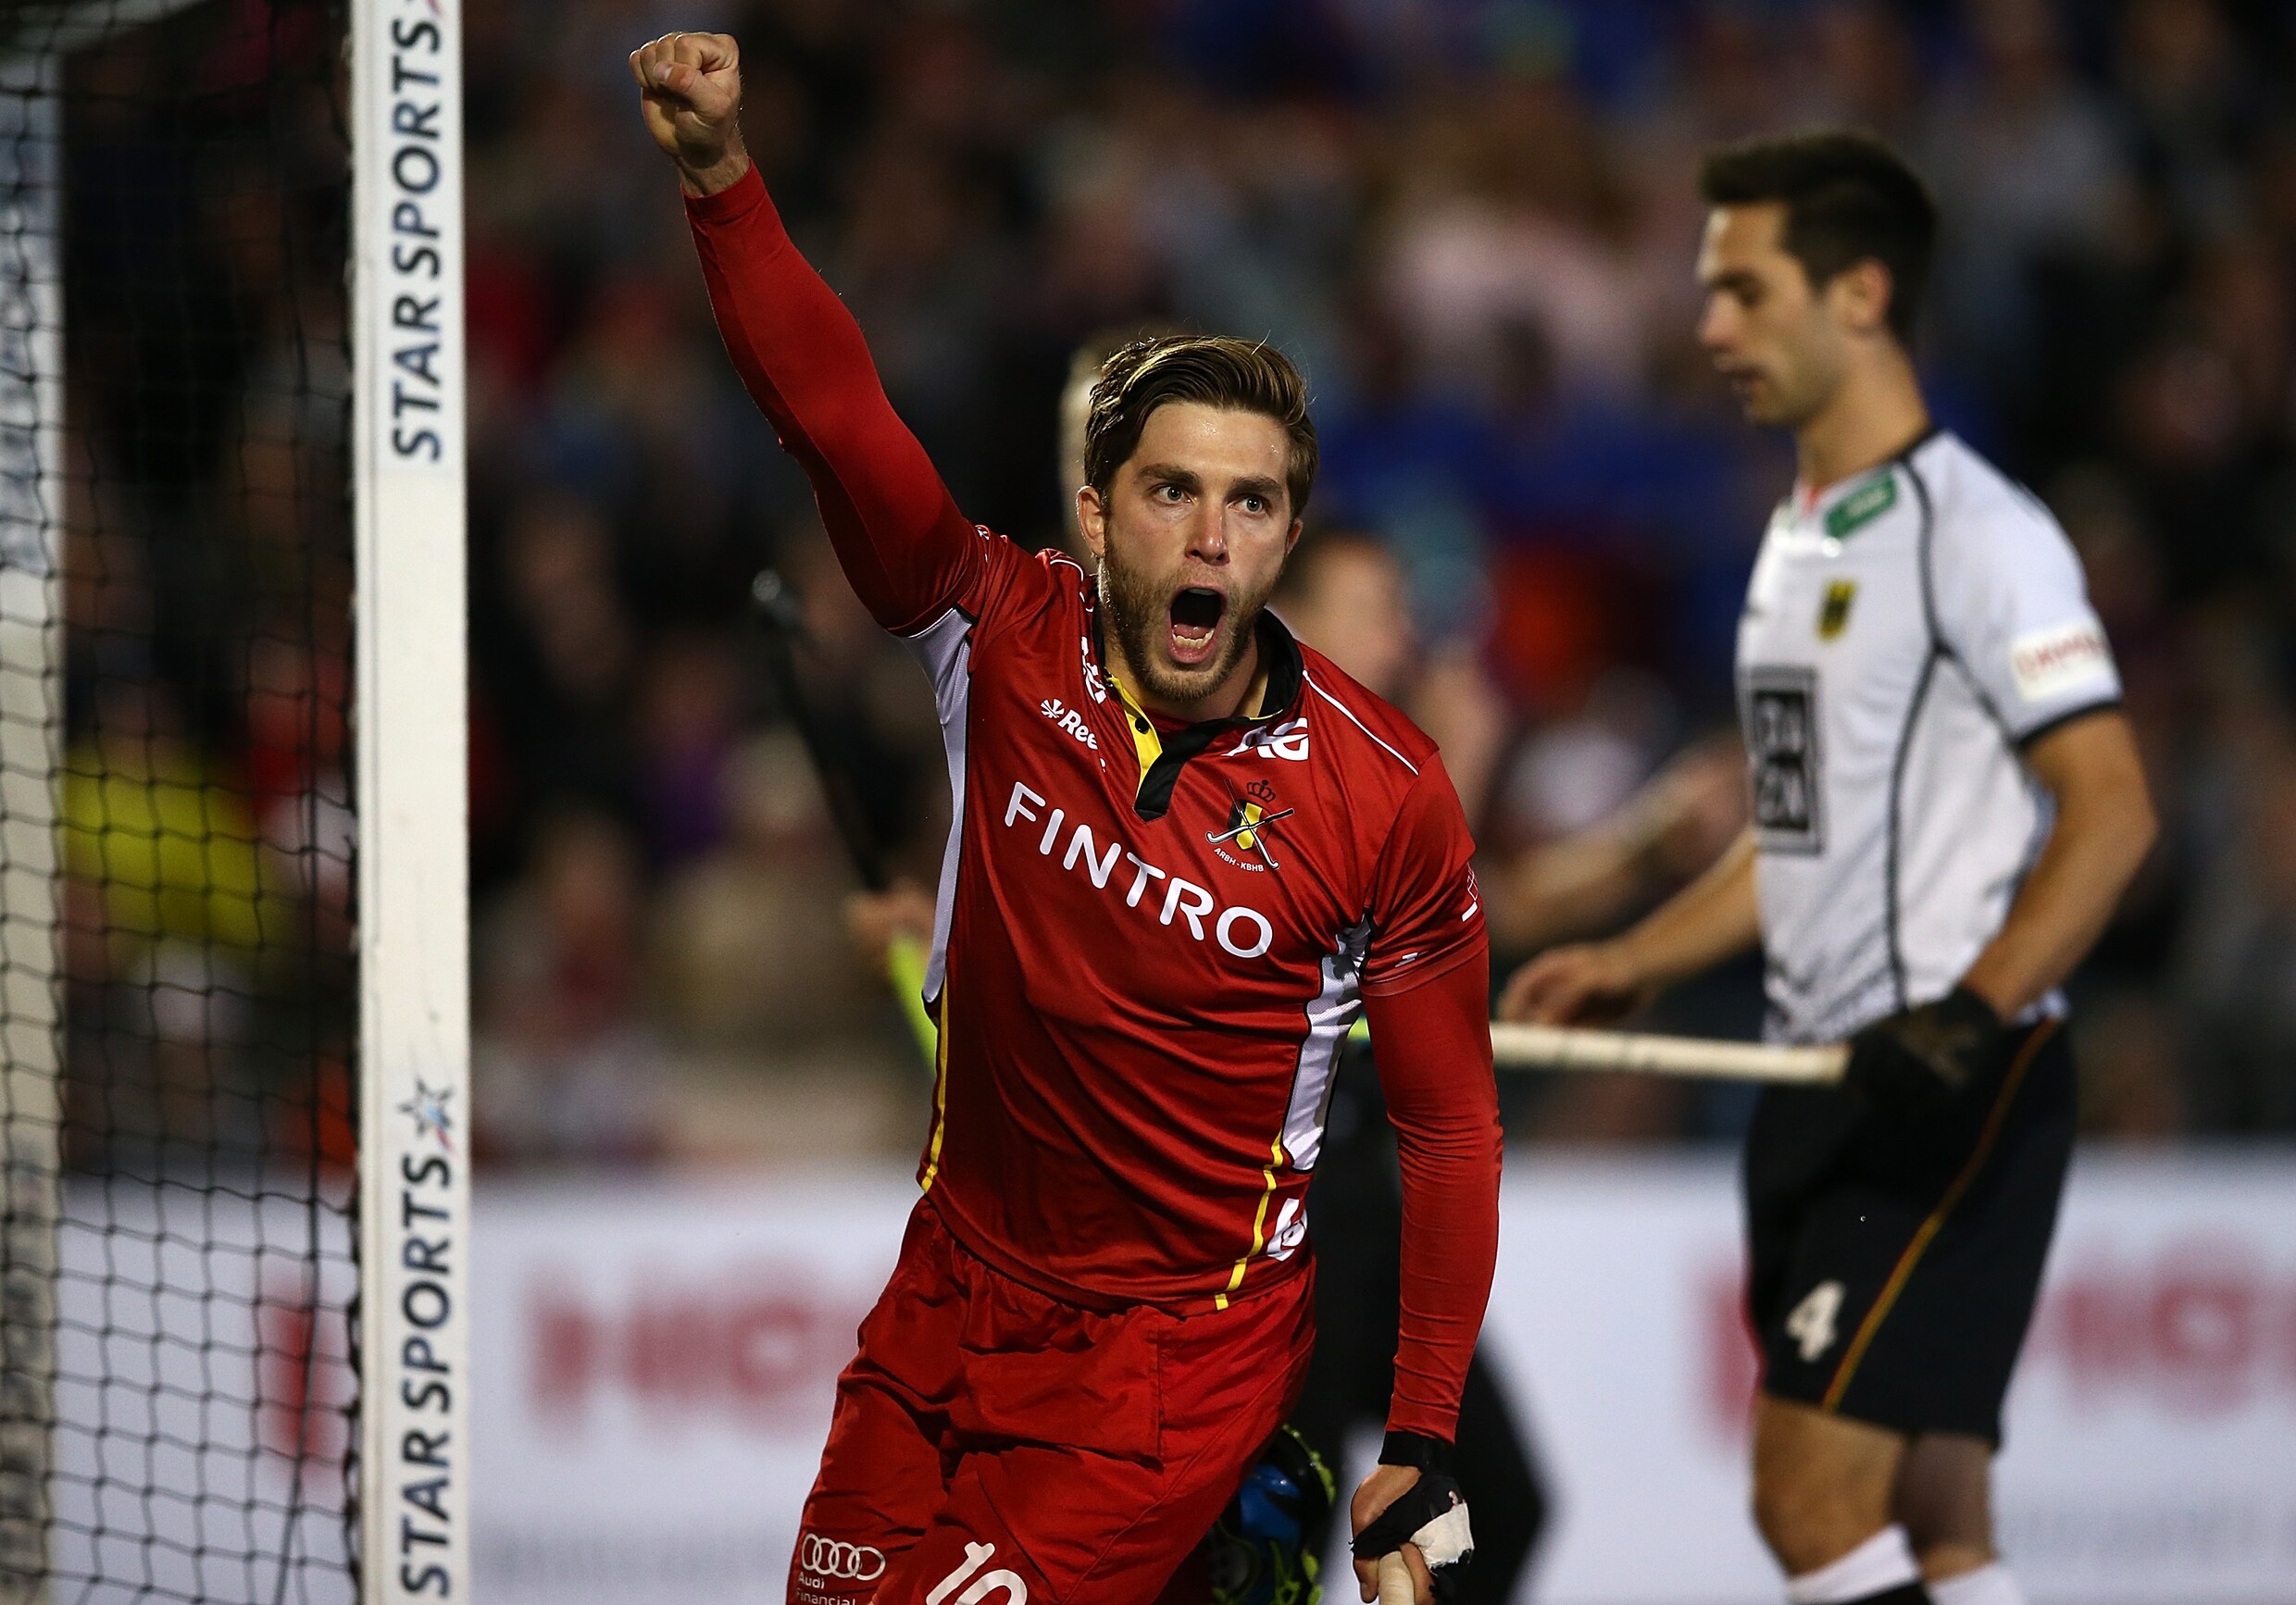 Red Lions vernederen Duitsers in finale World League